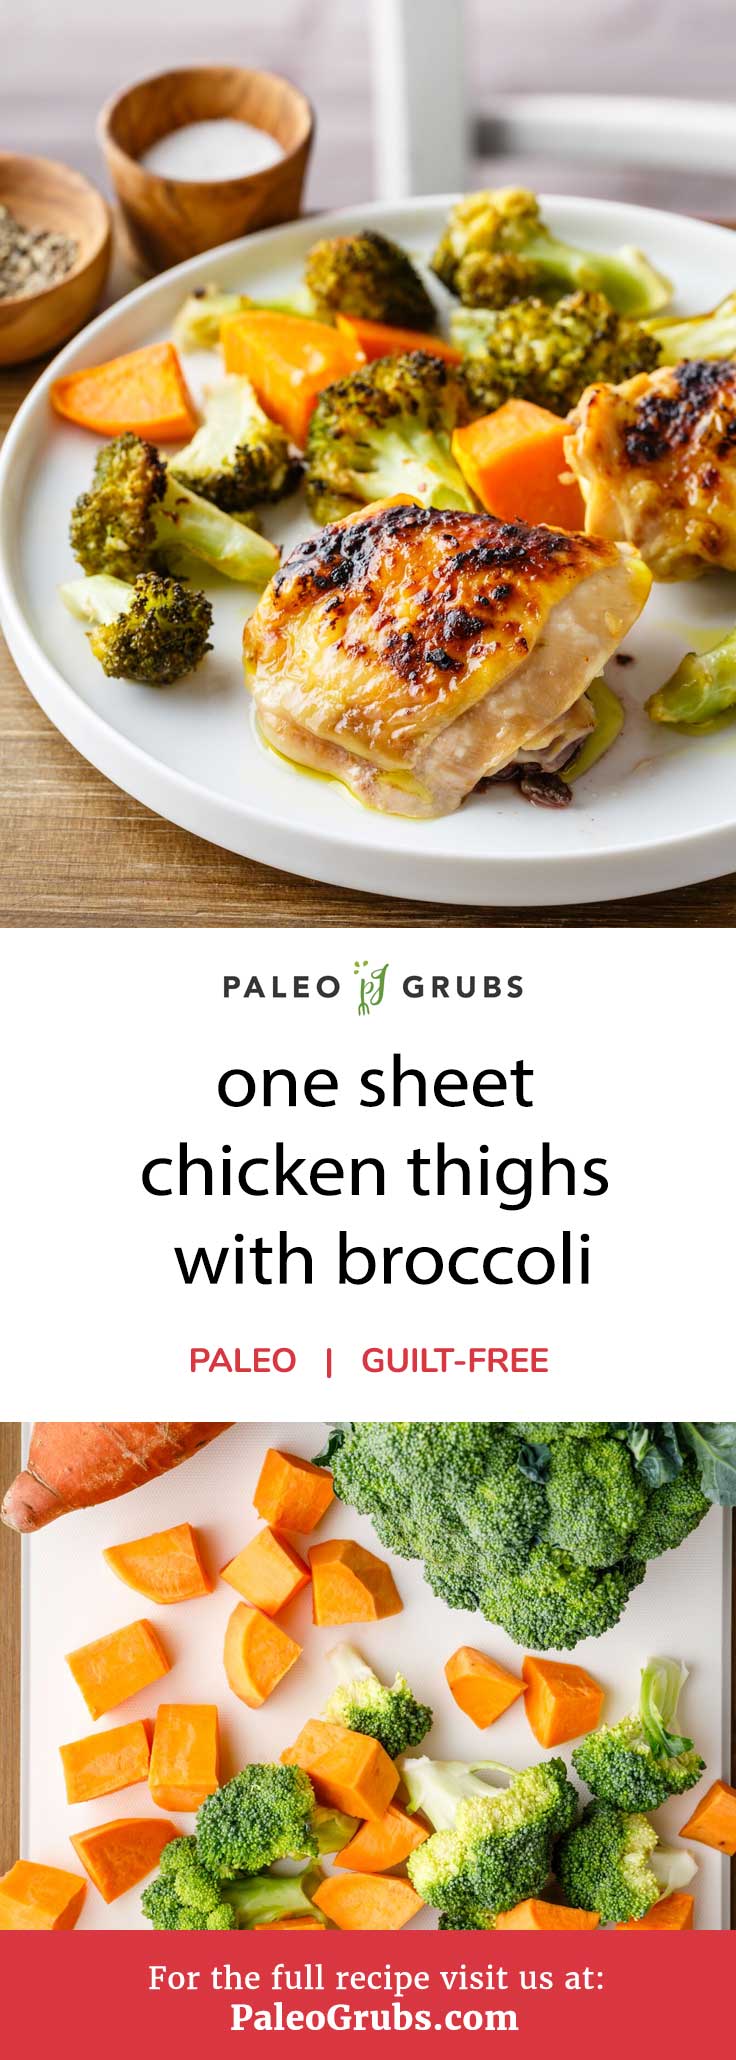 This one sheet chicken thighs with sweet potato and broccoli has everything paleo lovers are looking for in one amazingly healthy meal. It combines pieces of juicy dark meat chicken combined with sweet potatoes and broccoli that have all been marinaded in a fantastic homemade mixture that you’ll go nuts for.